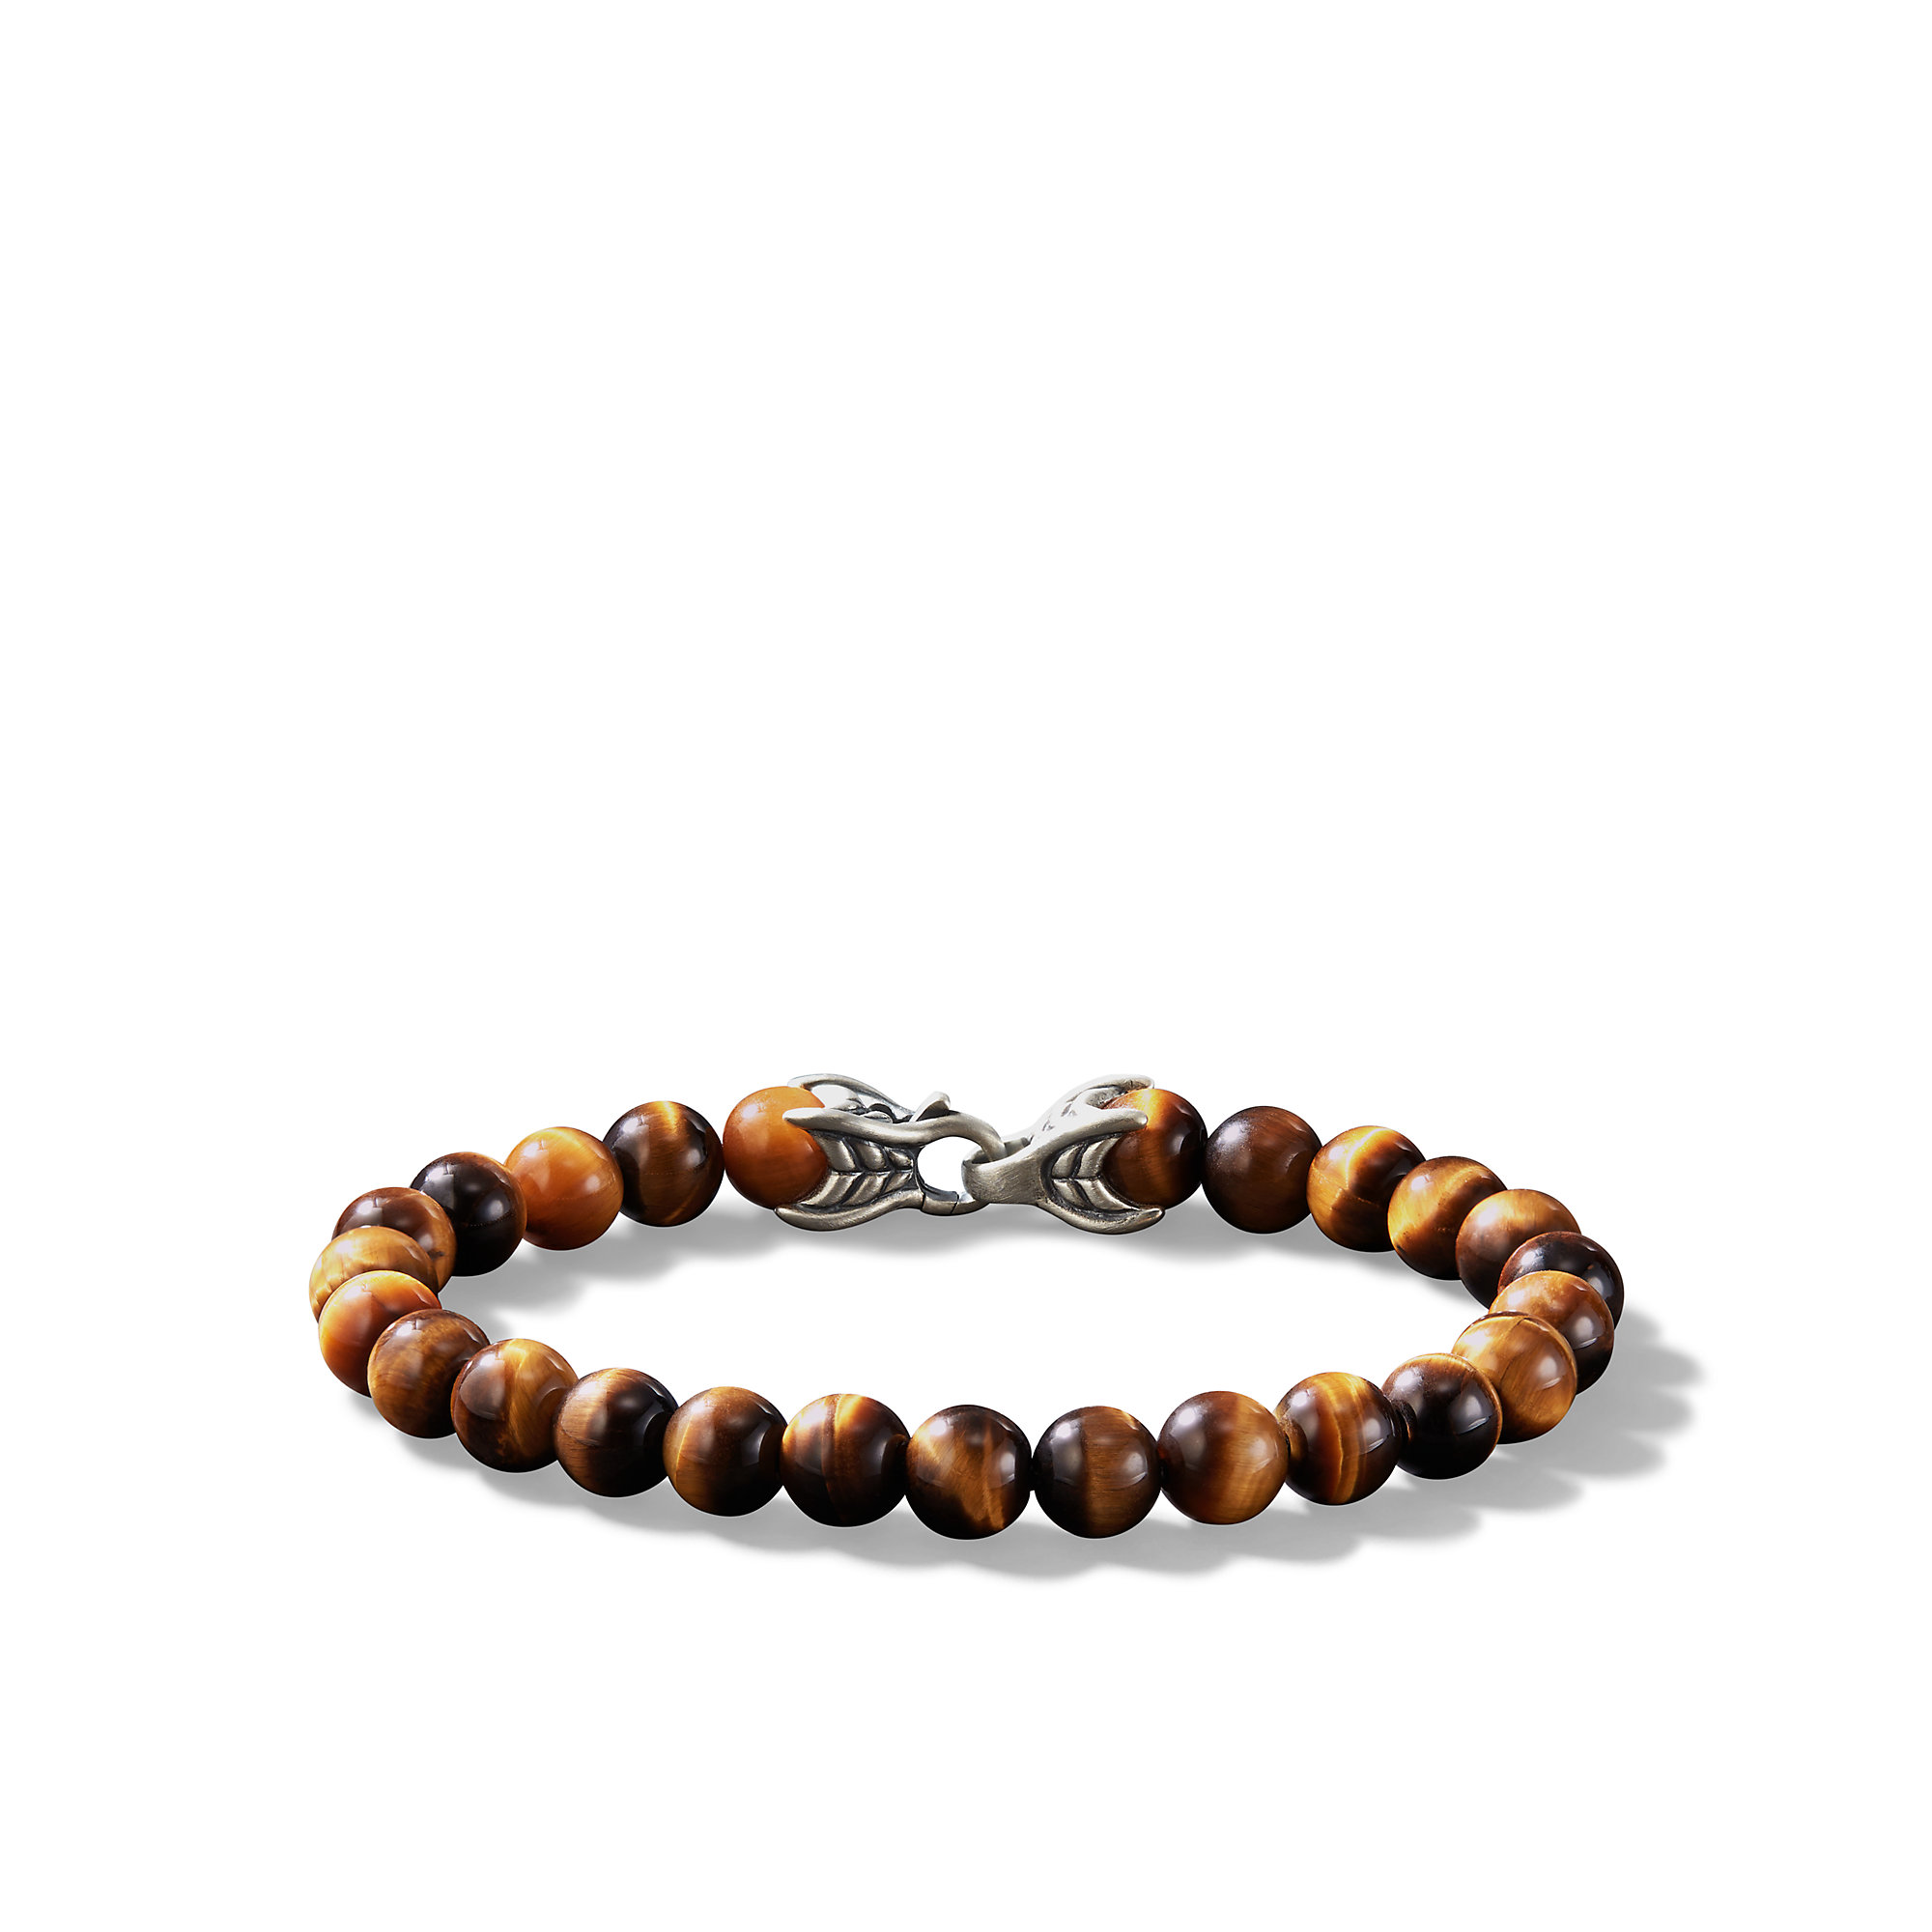 Spiritual Beads Bracelet in Sterling Silver with Tiger's Eye